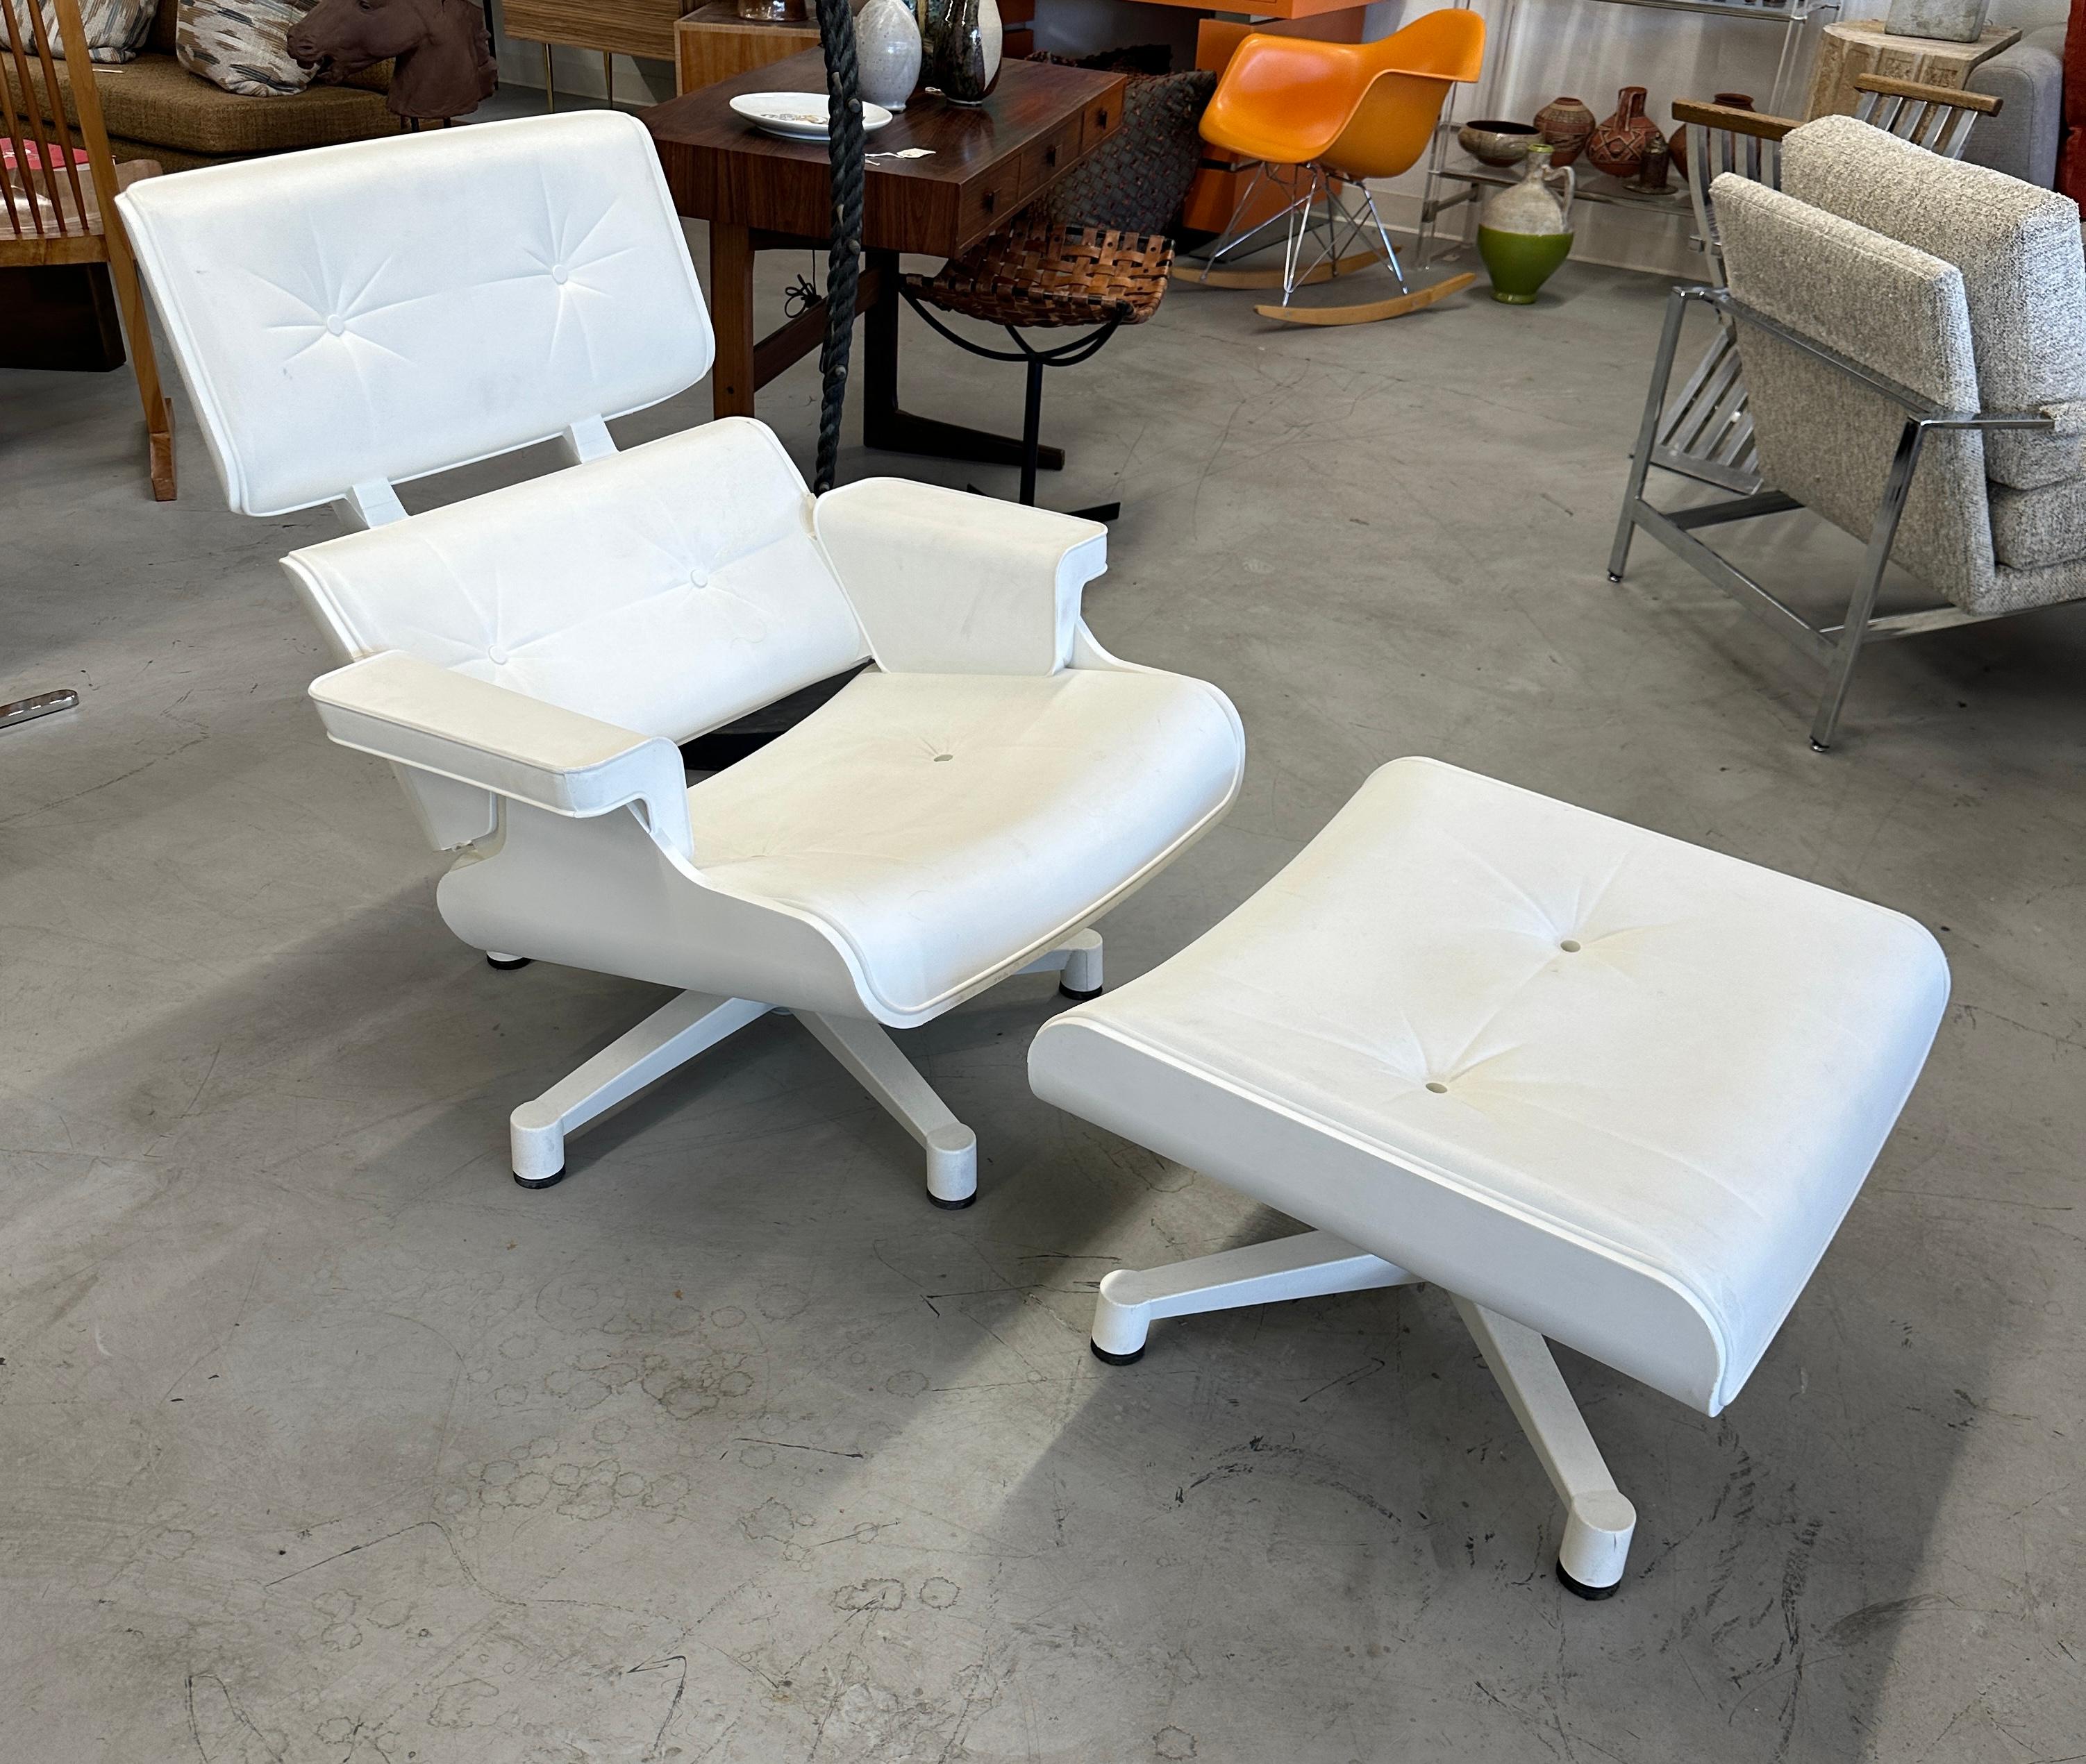 Whimsical take on a Classic Eames chair and ottoman this 1956 chair by Mal Furniture is all plastic and is intended for outdoor use. It has drain holes in the seat and in the ottoman. I’m one of the original ads it is shown floating in a POOL. We